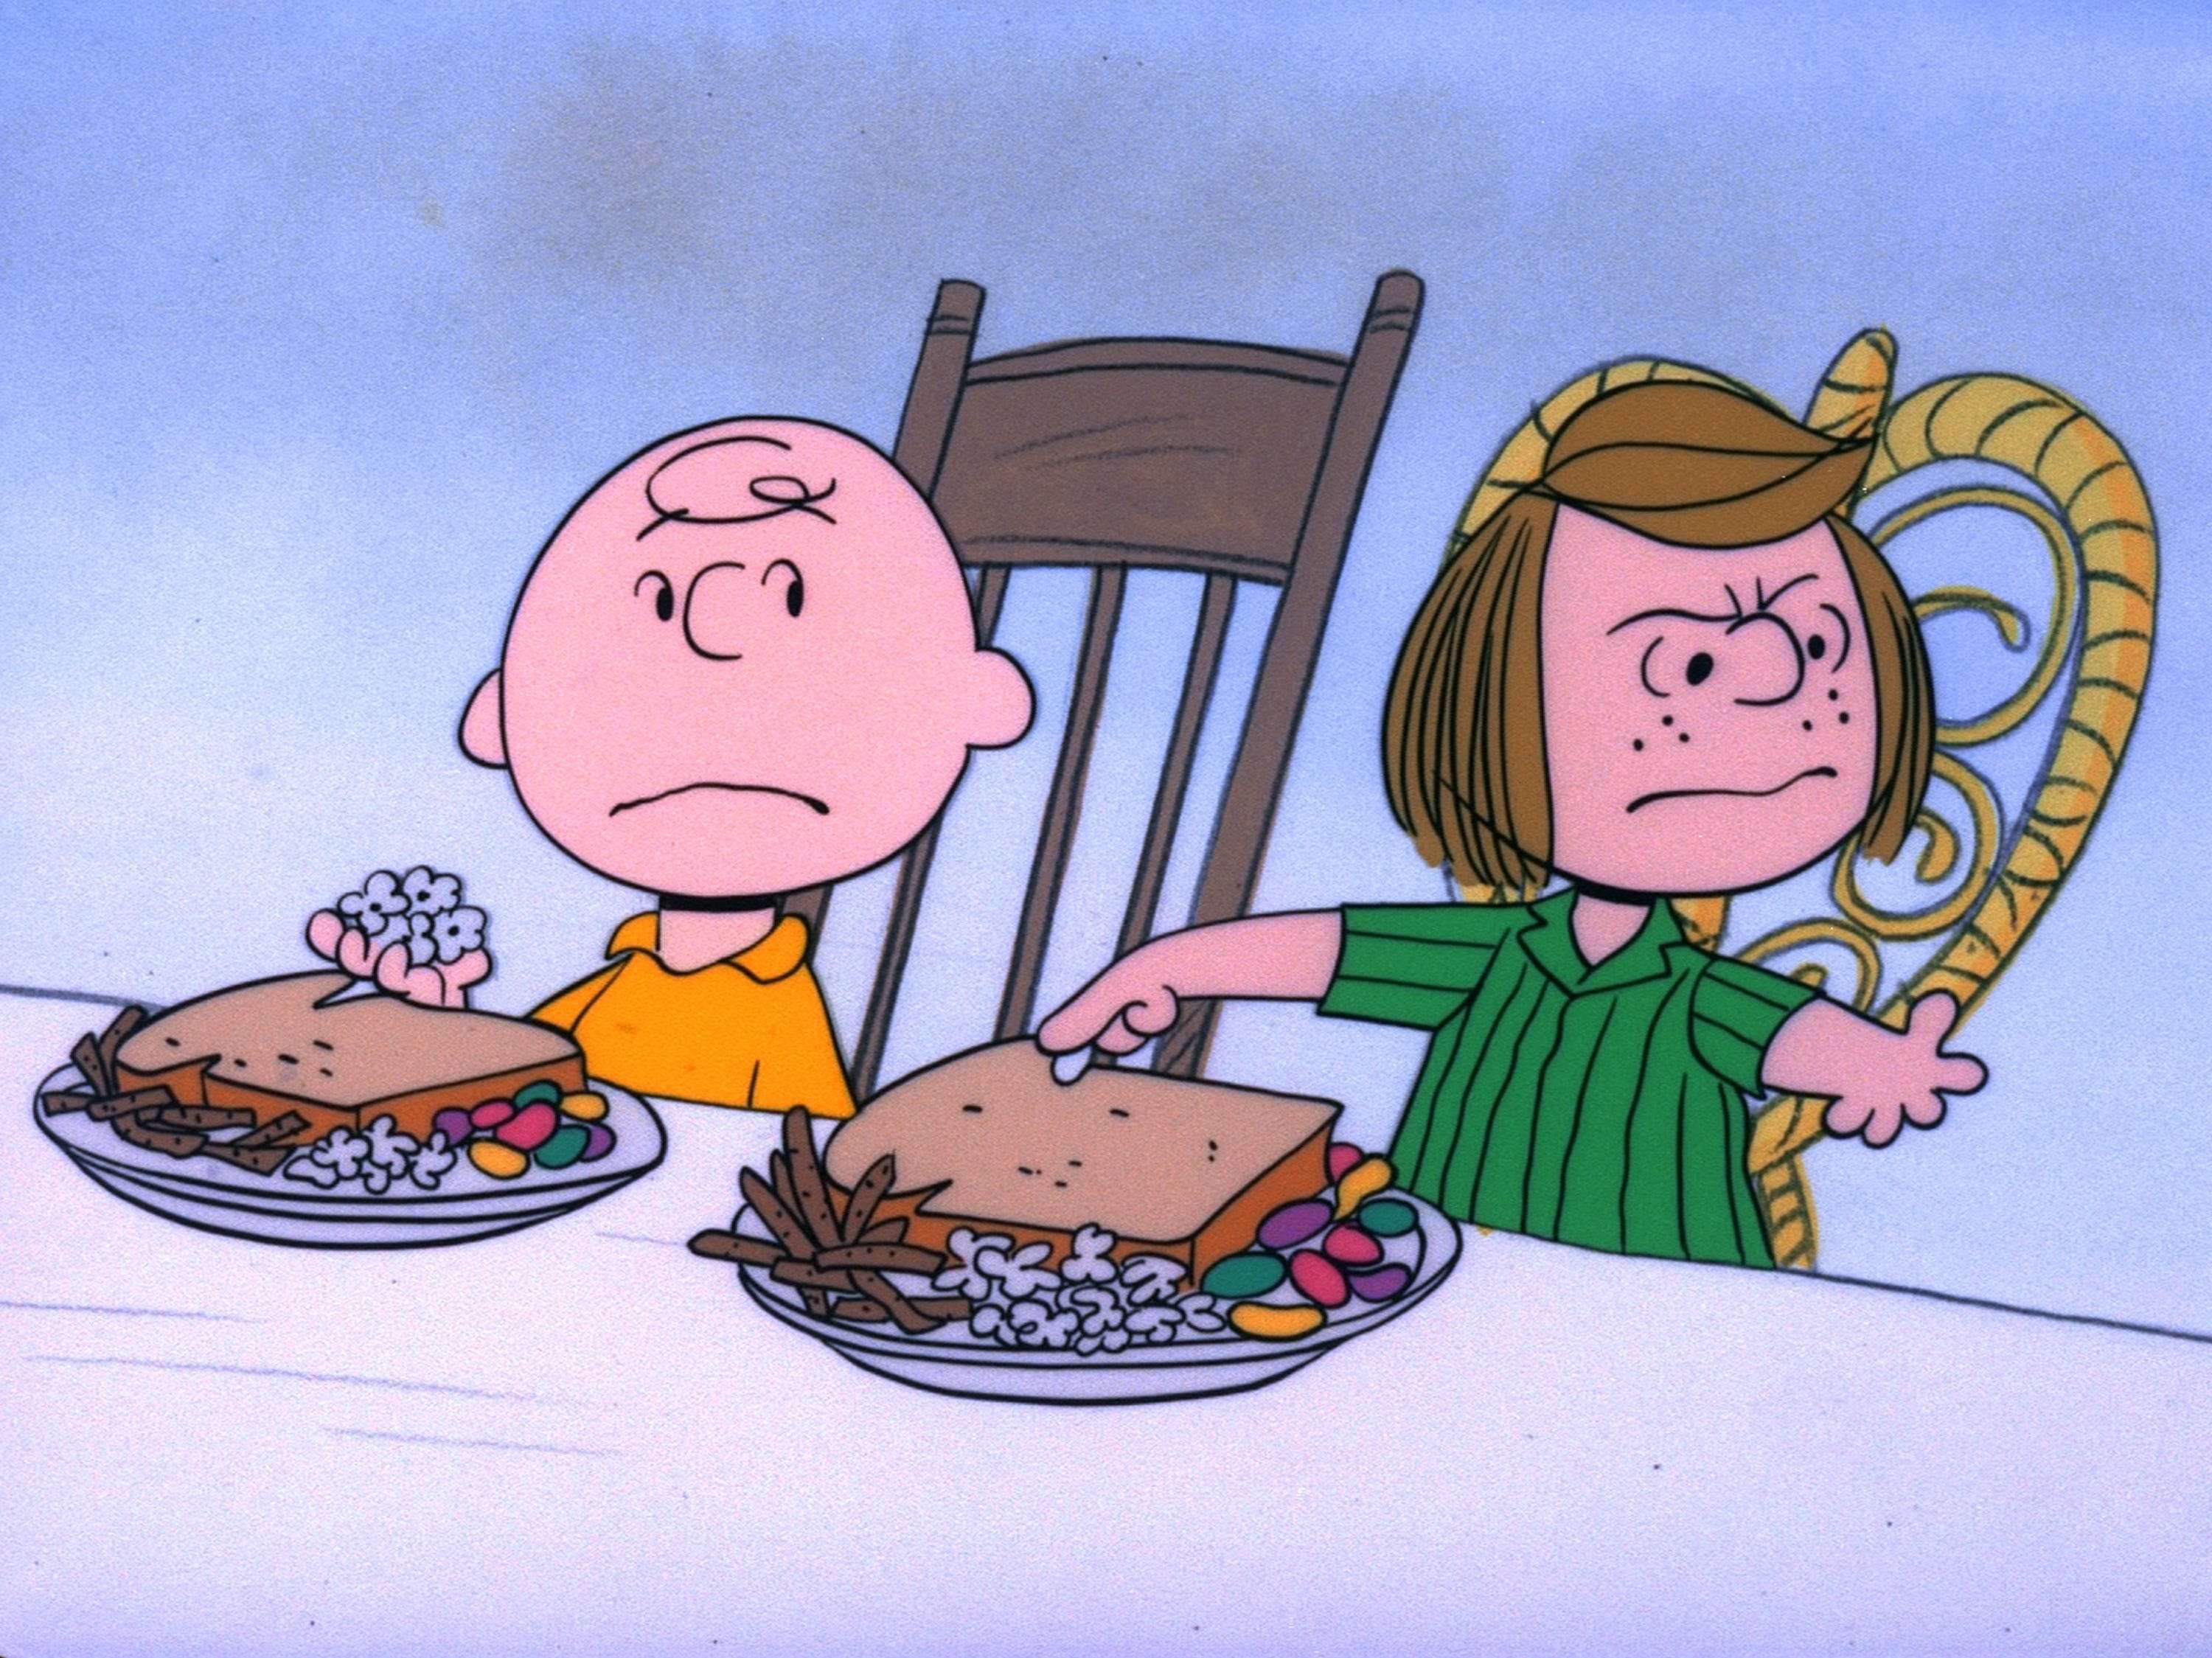 Peanuts holiday specials will air on PBS after rights-holder Apple's move to make them streaming-only sparked